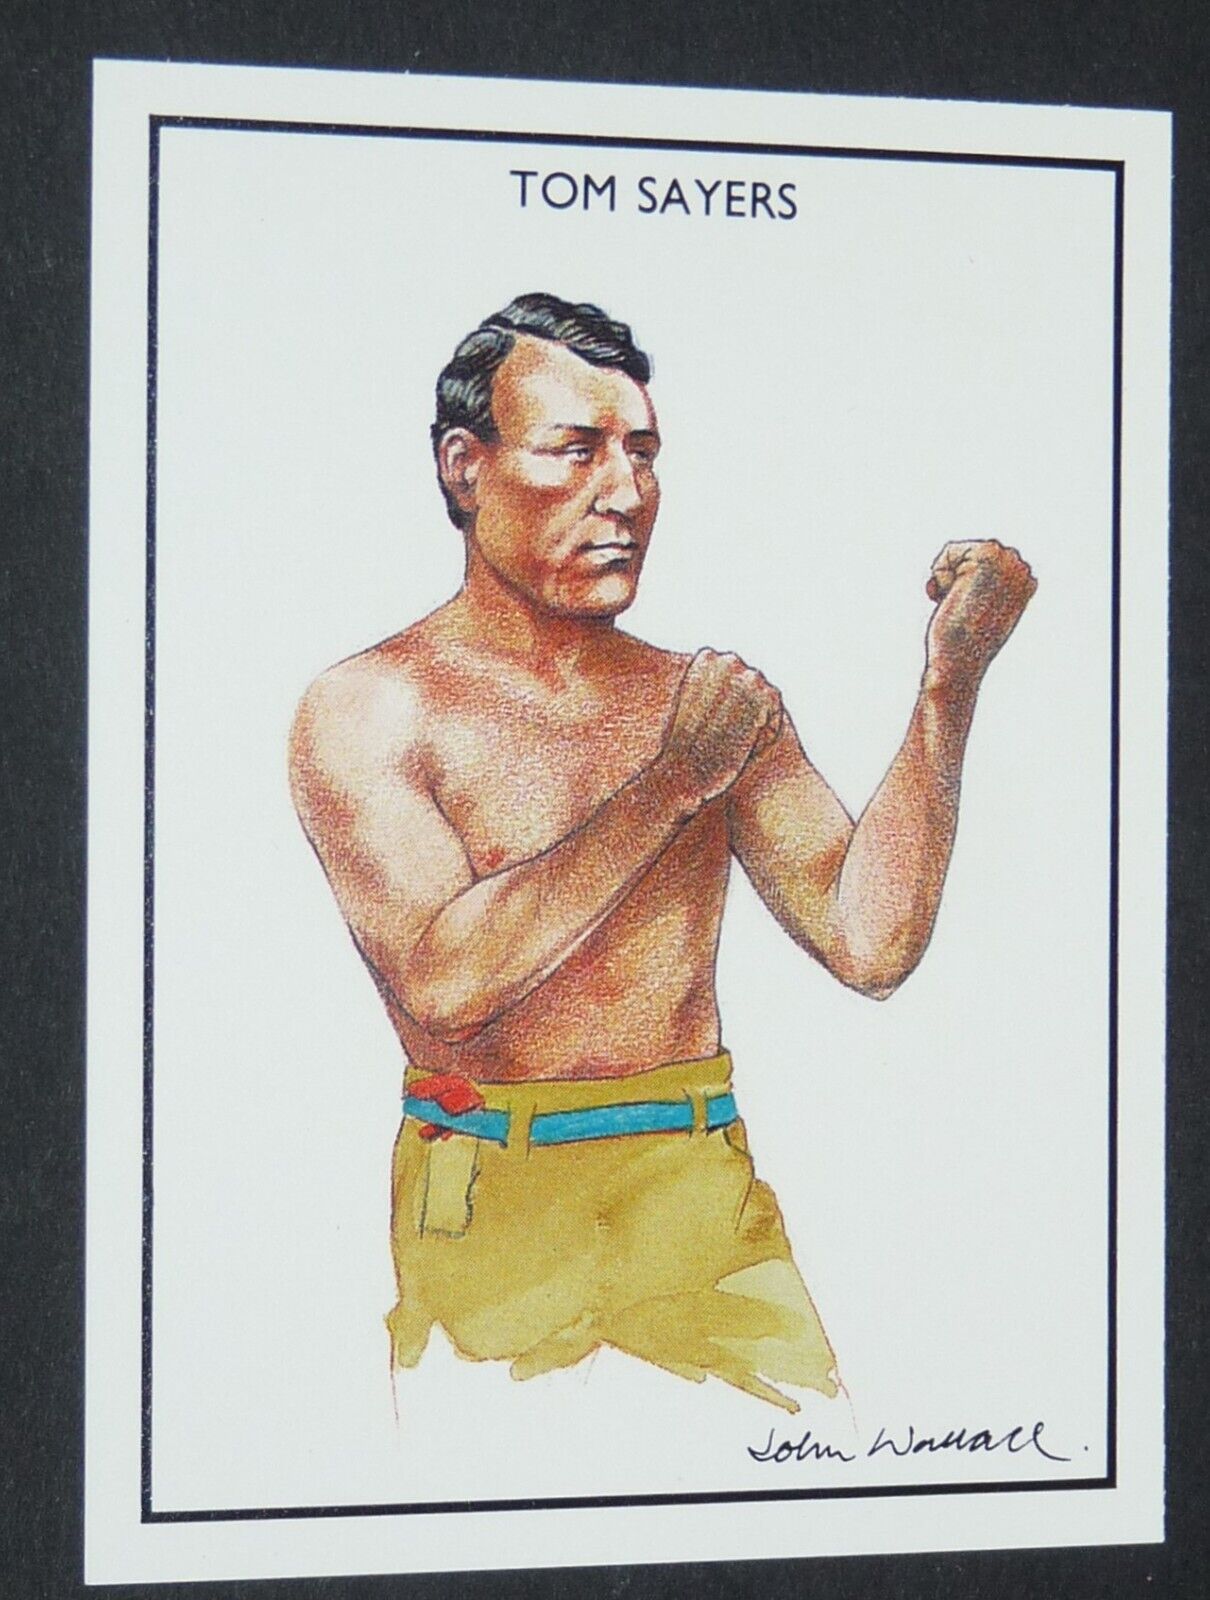 IDEAL ALBUMS CARD 1991 BOXING GREATS ILL. JOHN WALLACE #22 TOM SAYERS BOXING